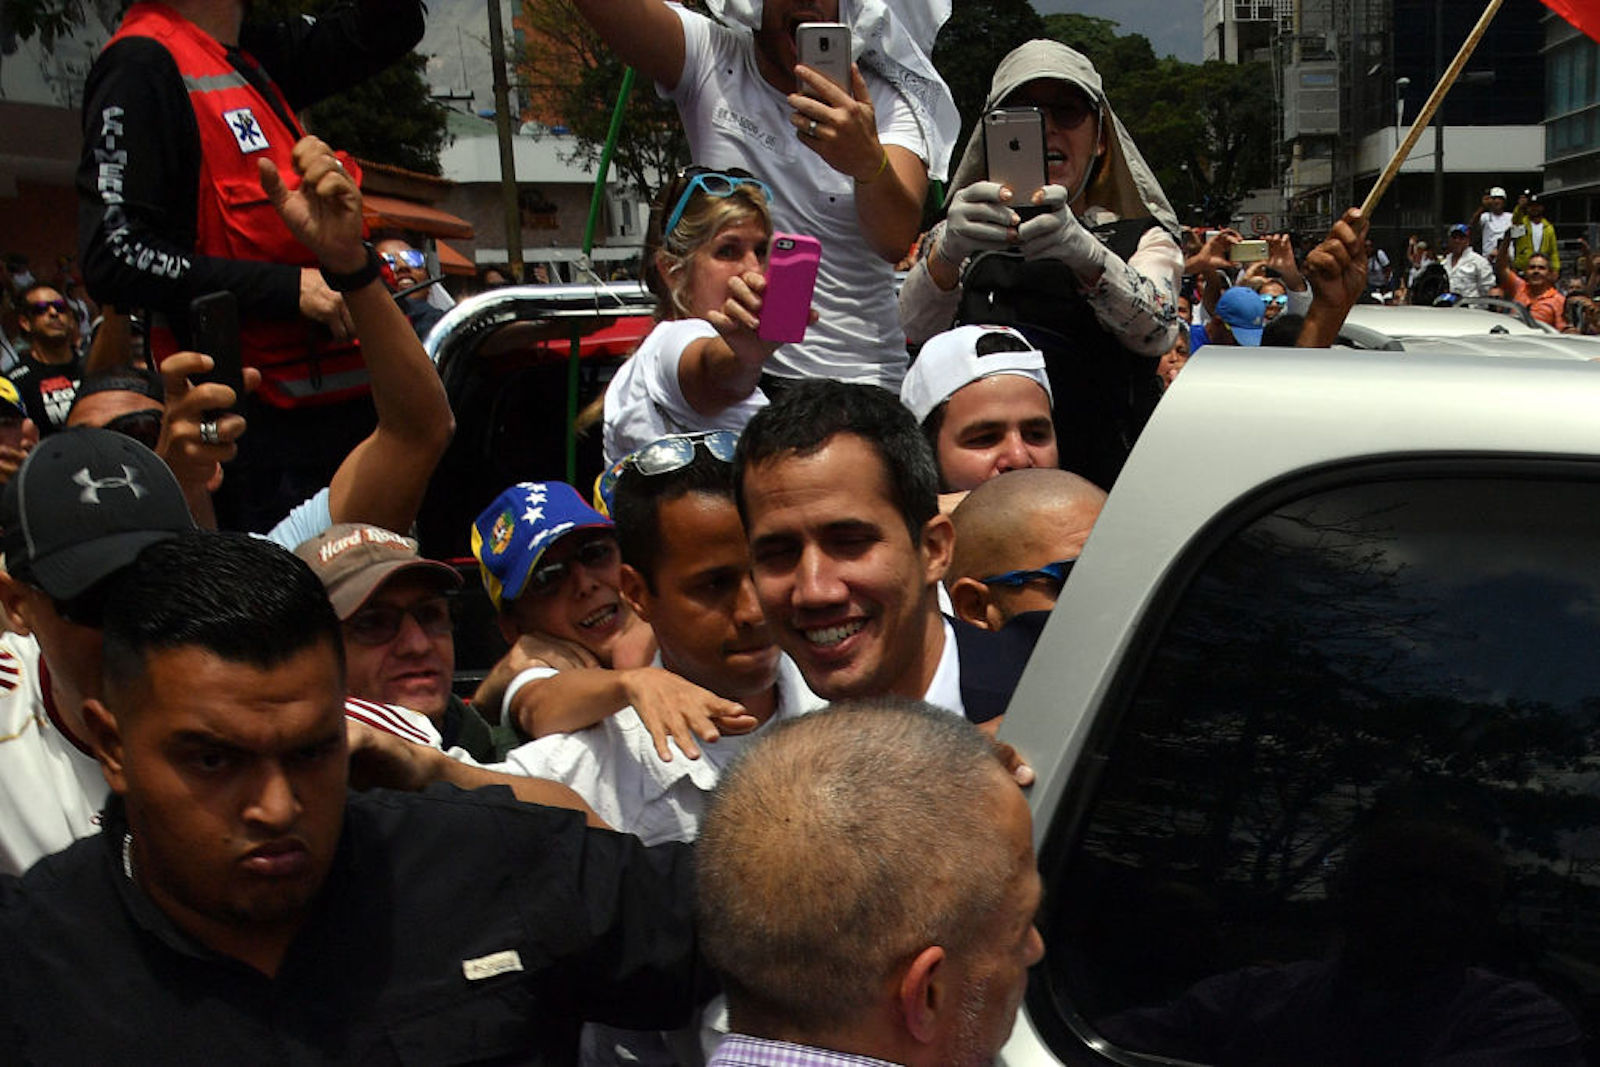 Venezuelan opposition leader and self-proclaimed acting president Juan Guaido (C) is surrounded by supporters upon his arrival in Caracas on March 4, 2019. - Venezuela's opposition leader Juan Guaido was mobbed by supporters, media and the ambassadors of allied countries as he returned to Caracas on Monday, defying the threat of arrest from embattled President Nicolas Maduro's regime. Just before his arrival, US Vice President Mike Pence sent a warning to Maduro to ensure Guaido's safety. (Photo by Yuri CORTEZ / AFP) (Photo credit should read YURI CORTEZ/AFP/Getty Images)